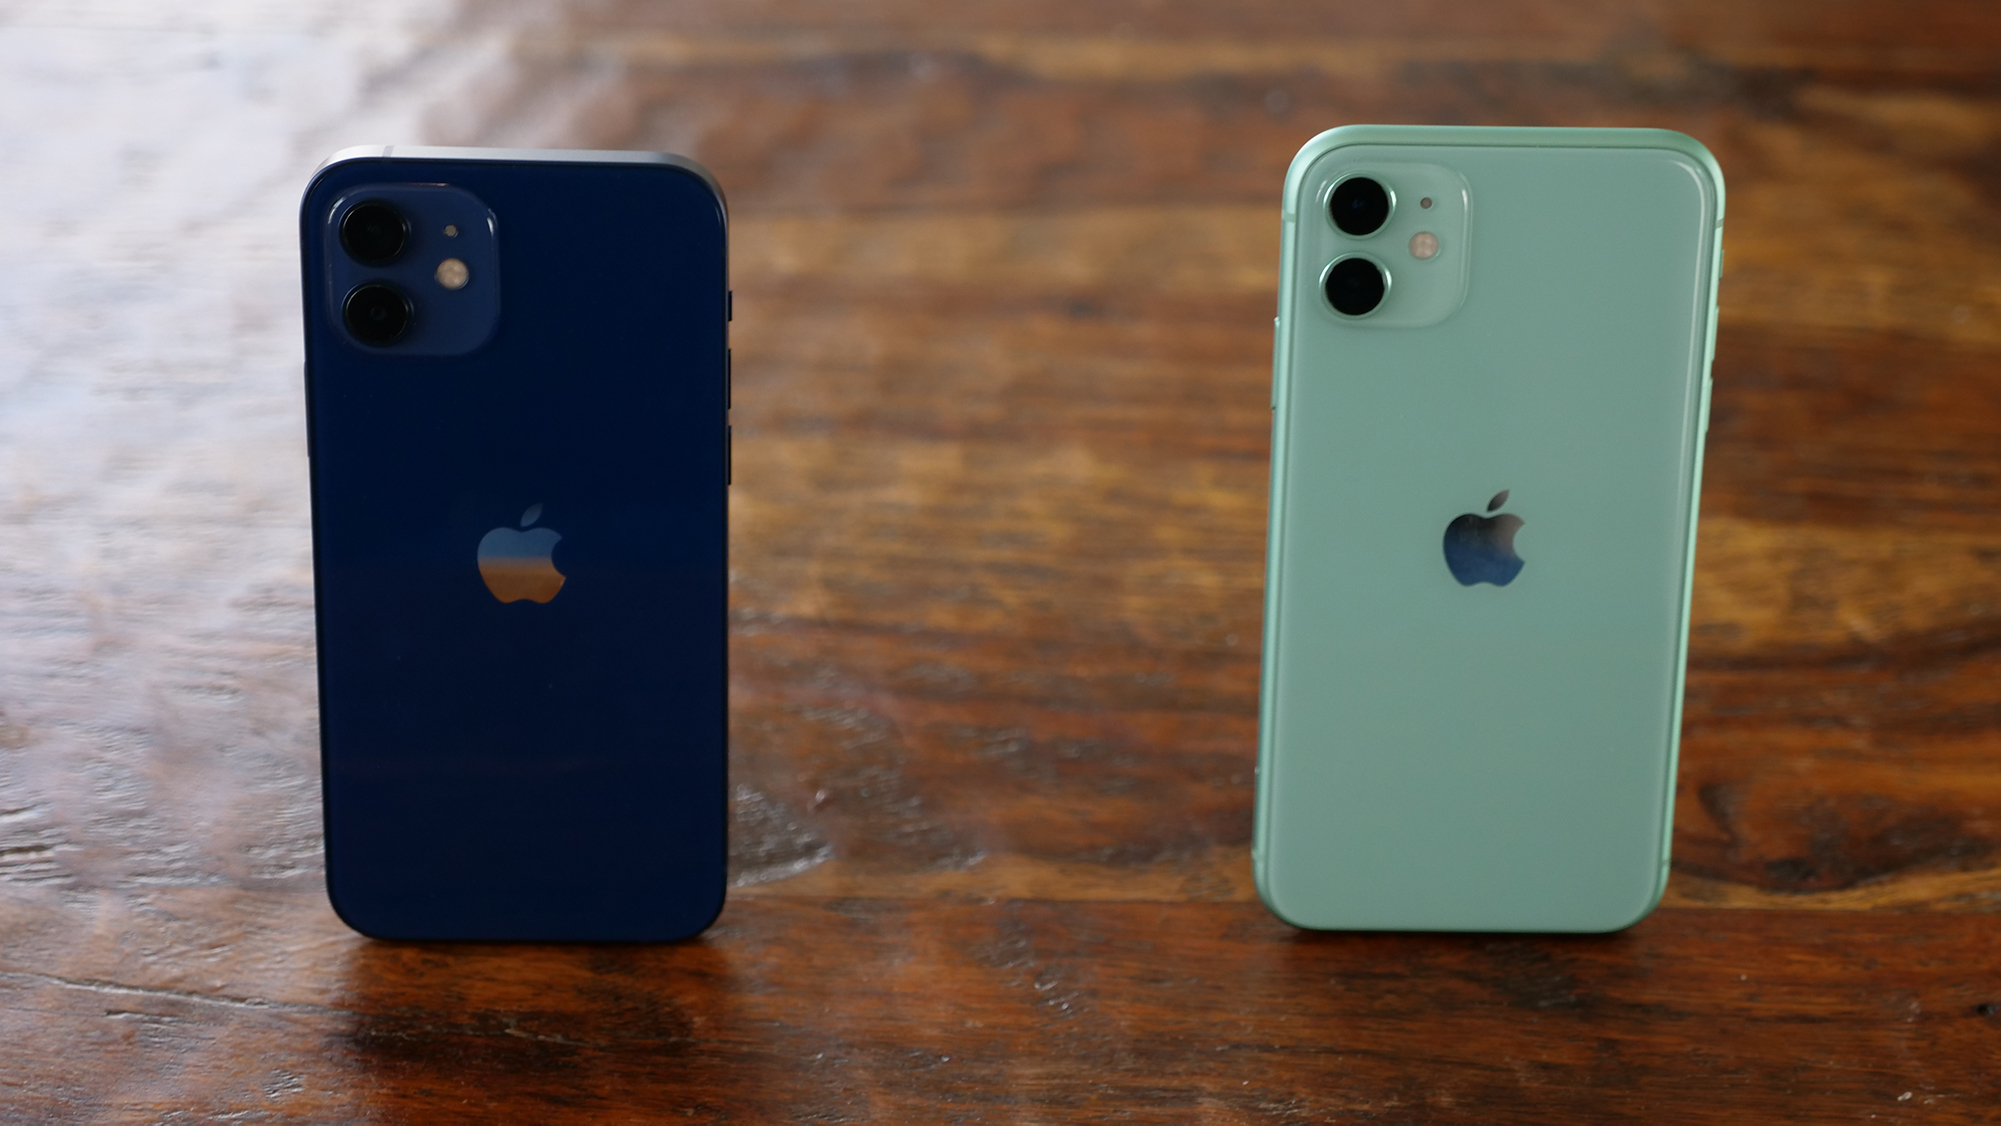 IPhone 12 vs. iPhone 11: Which should you buy? | Laptop Mag